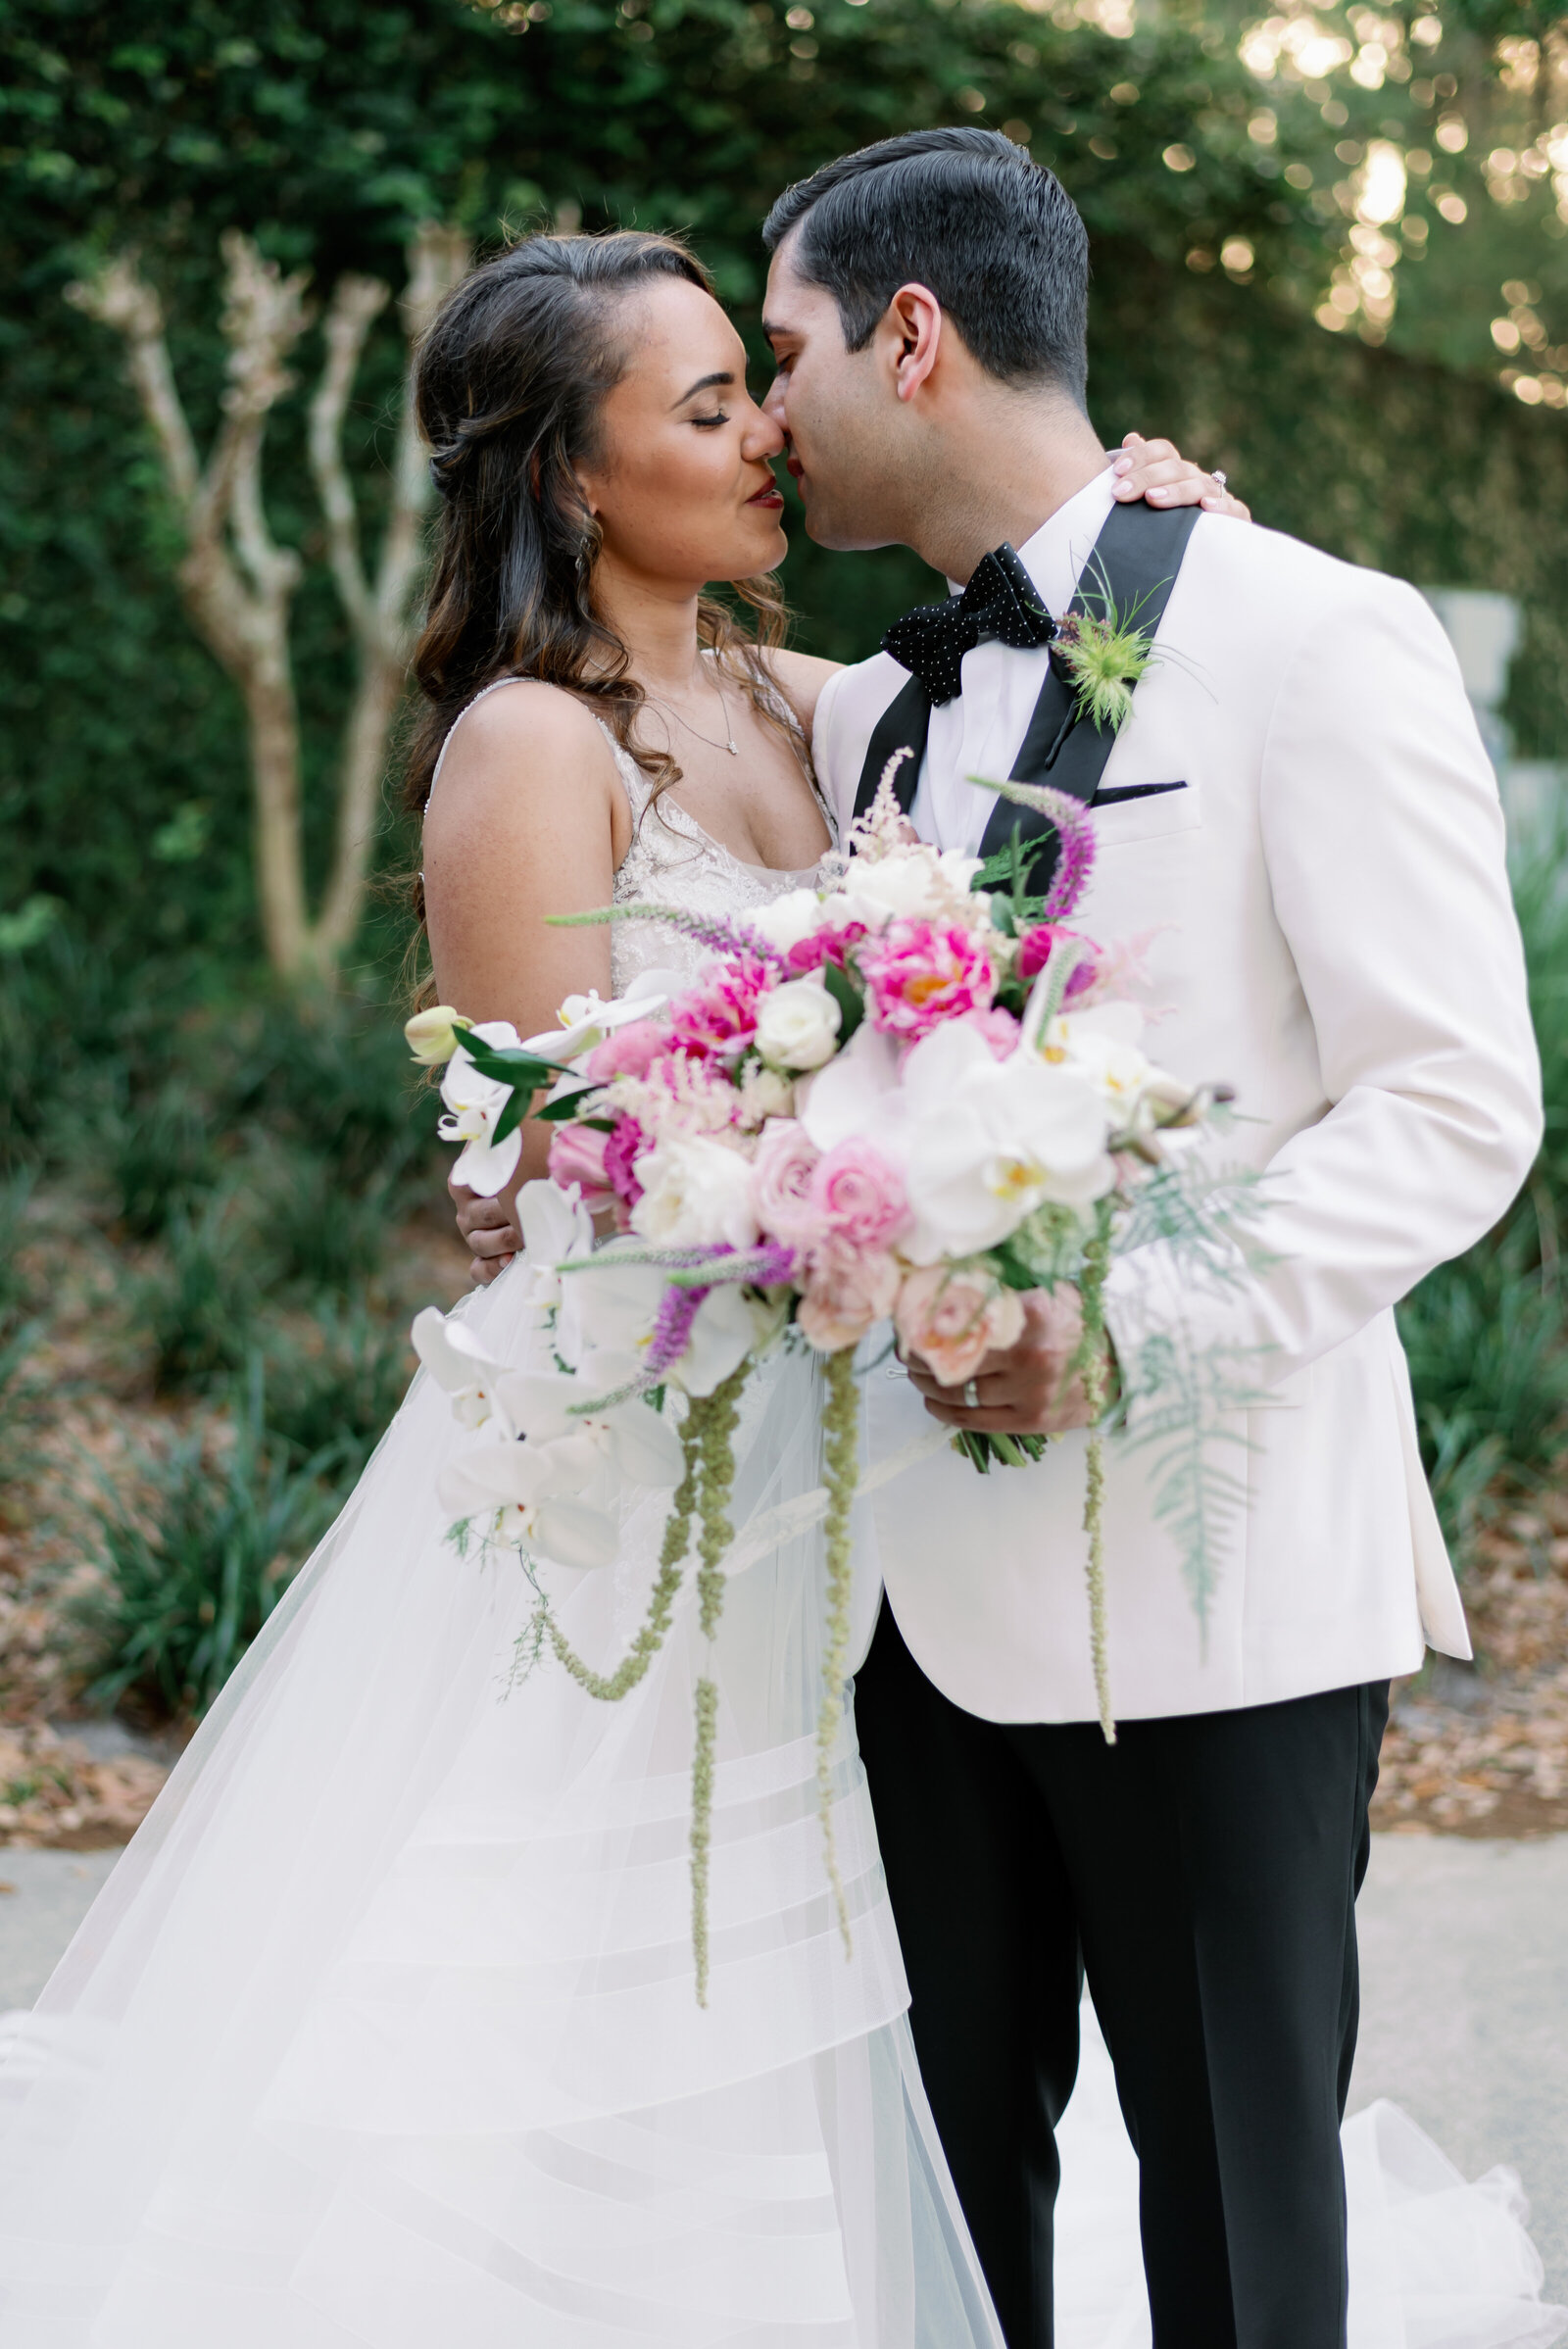 bride and groom close together in an embrace kissing tenderly and holding the wedding bouquet